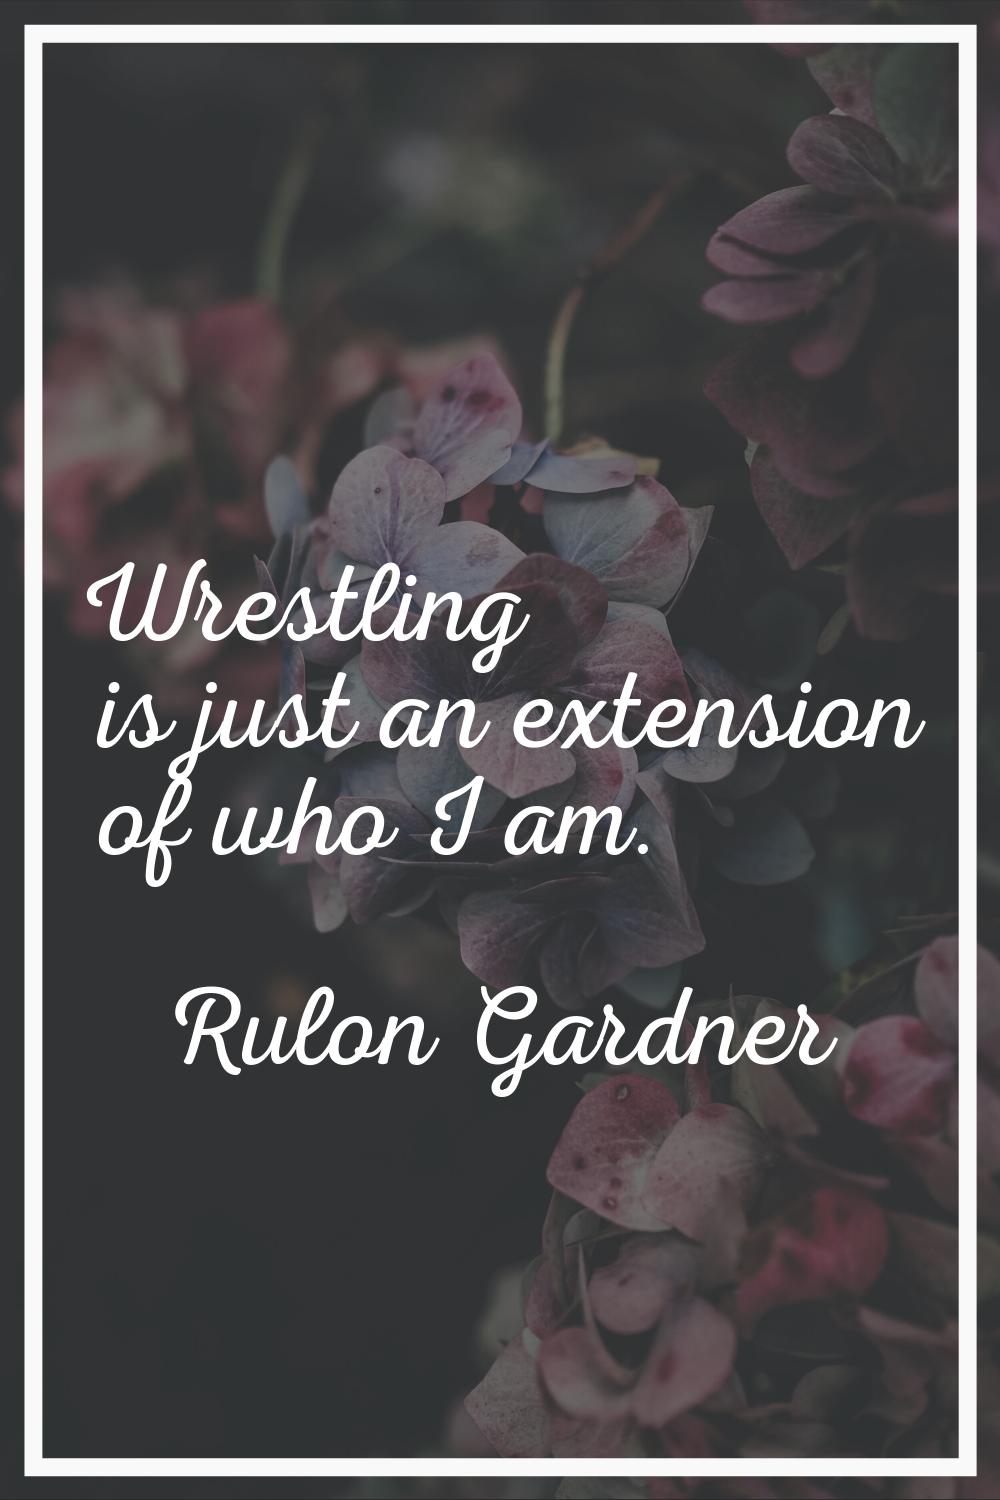 Wrestling is just an extension of who I am.